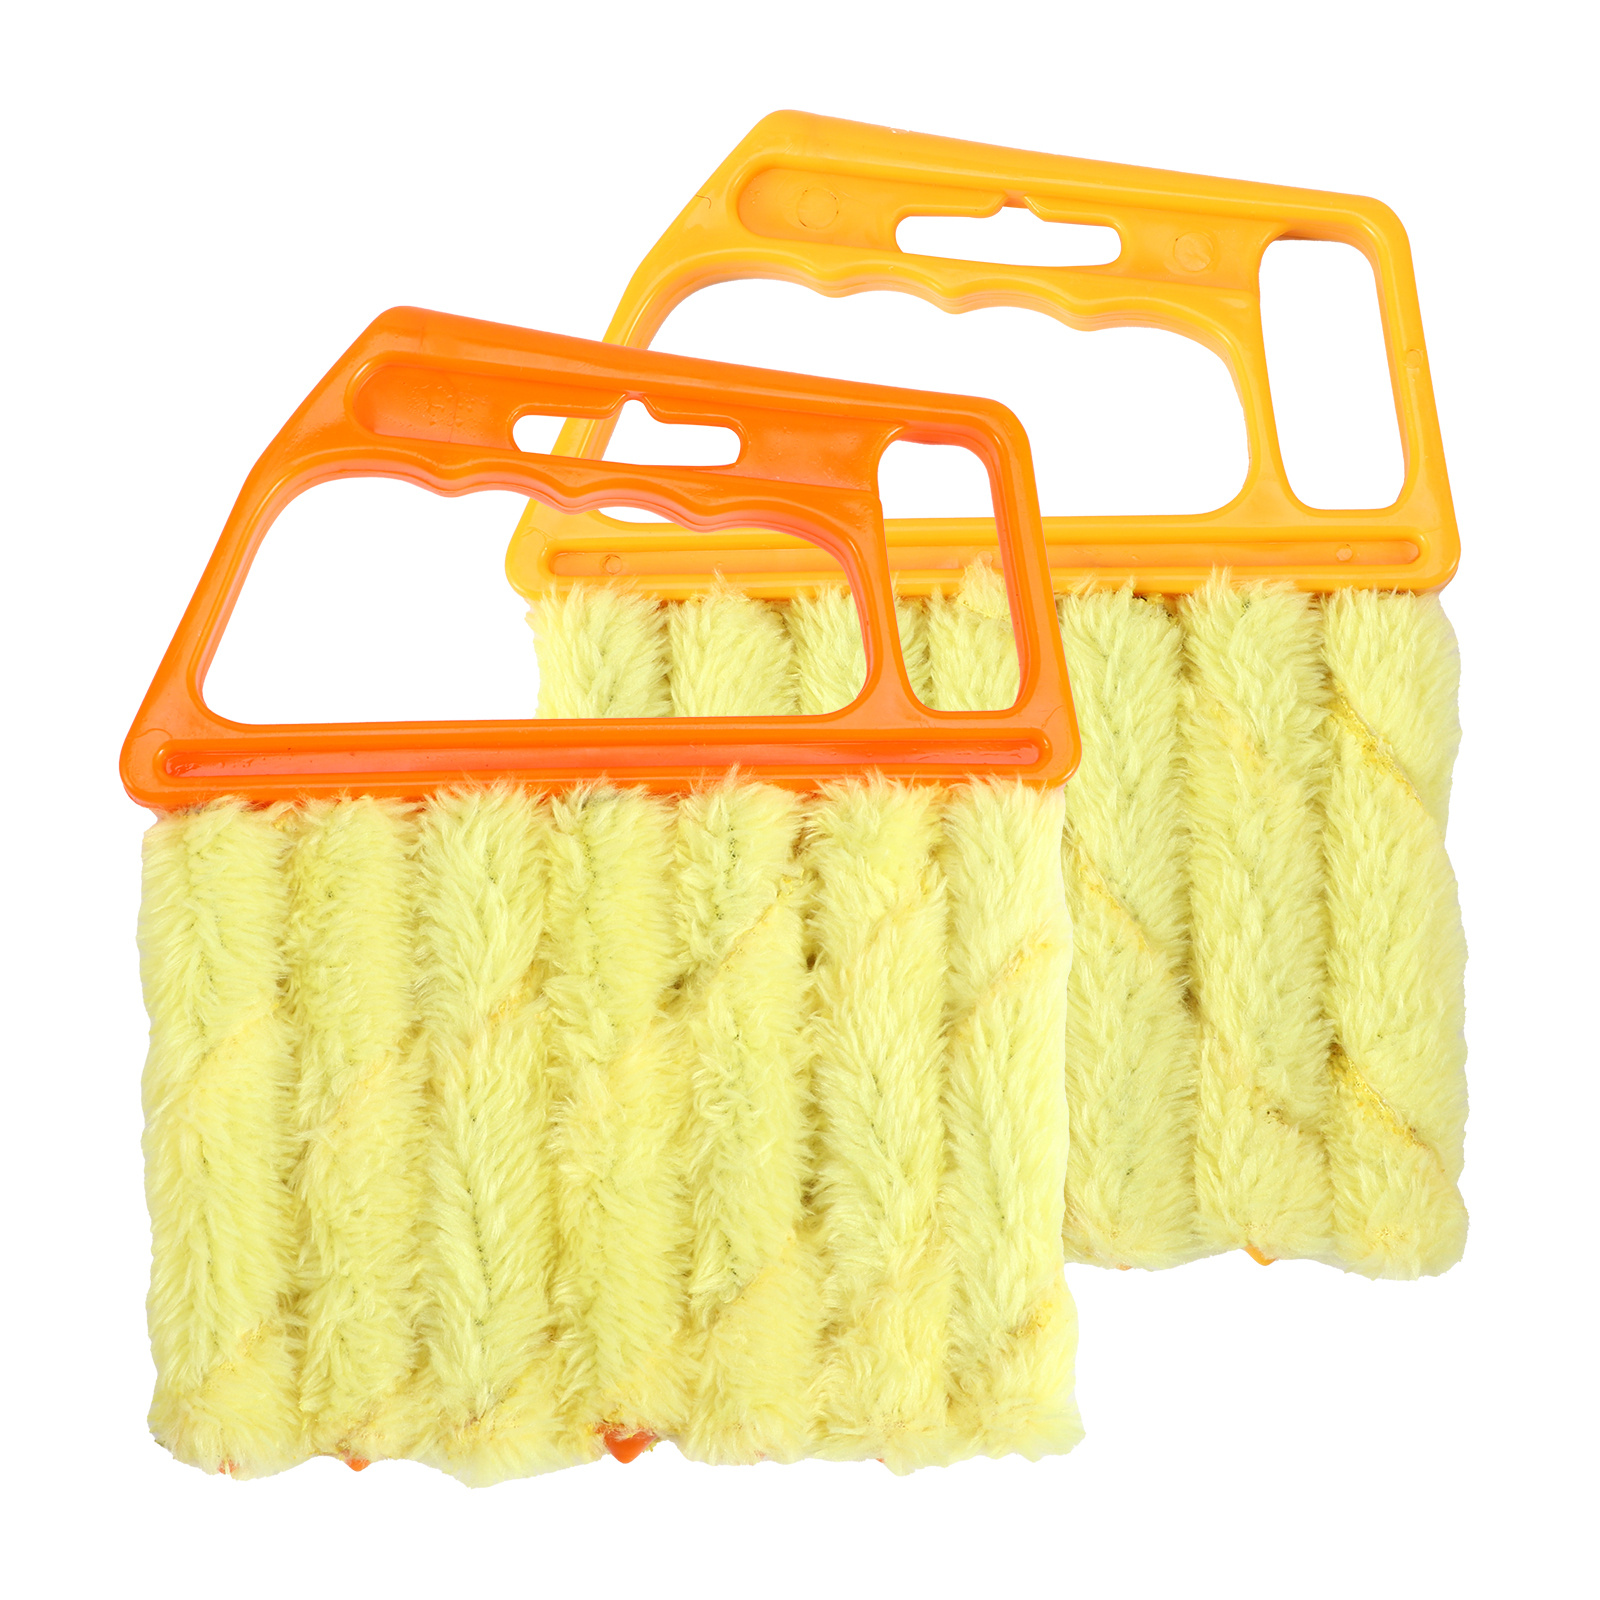 Portable Double End Car Vent Brush Computer Dust Cleaner Window Air Con  Blinds